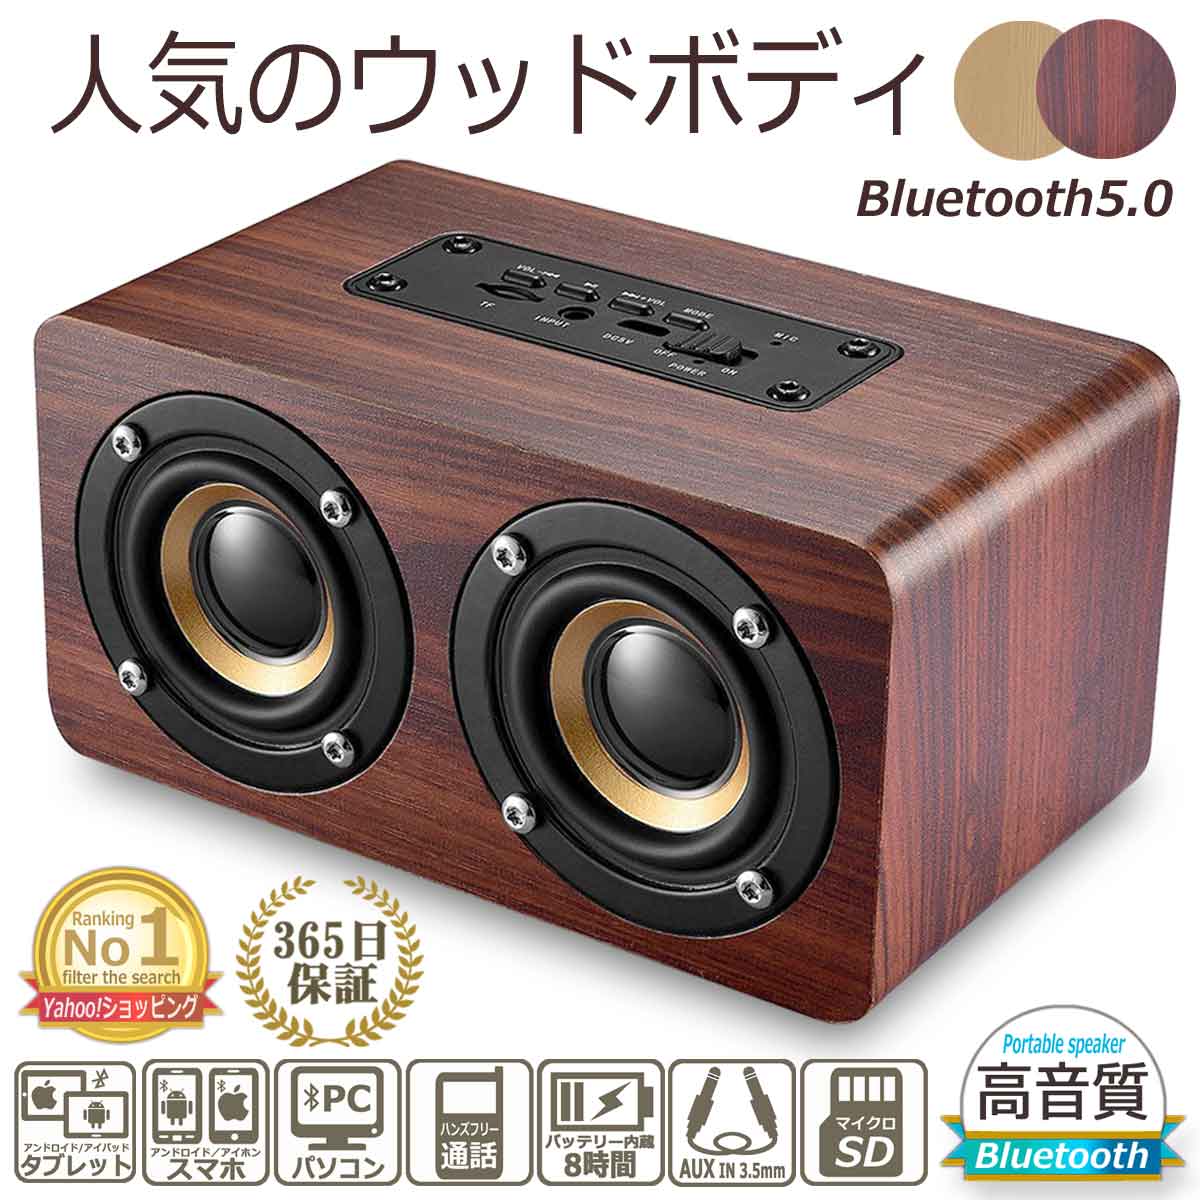  Bluetooth speaker Bluetooth speaker 5.0 wooden wood small size stereo wireless wireless connection smartphone tablet PC mobile hands free stylish 